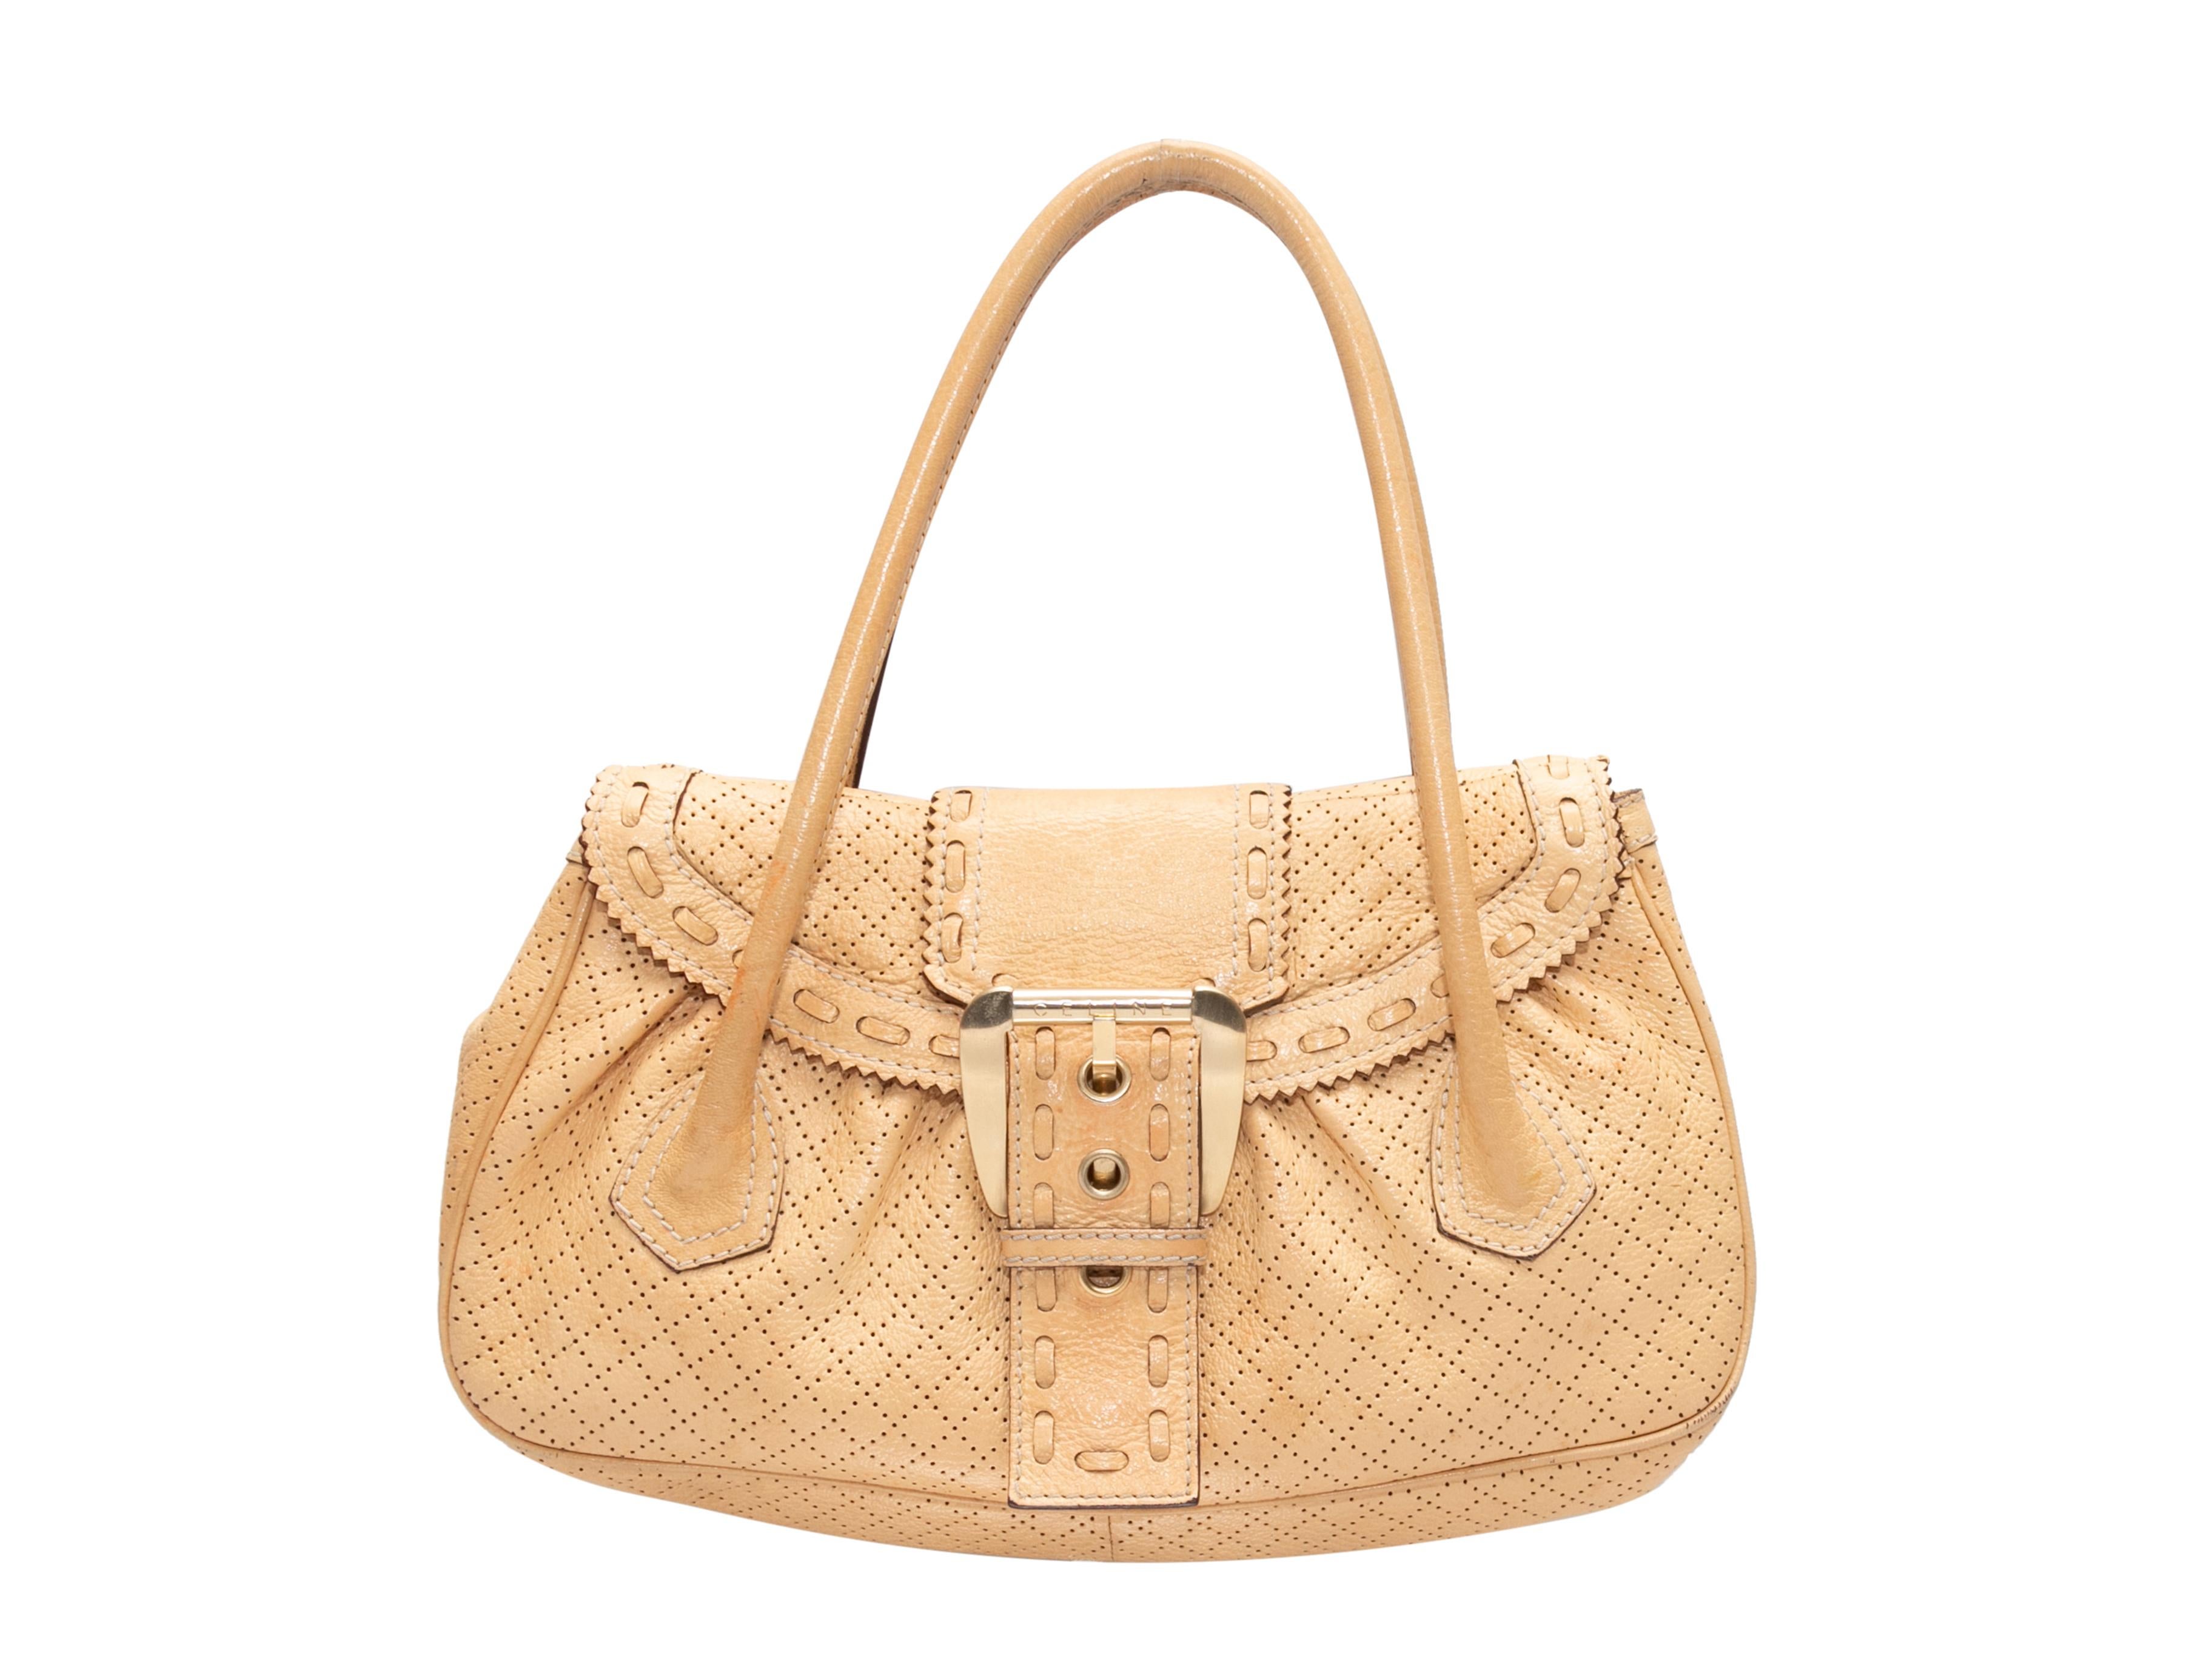 Beige Celine Perforated Leather Buckle Shoulder Bag. This shoulder bag features a leather body, gold-tone hardware, dual rolled shoulder straps, and a front buckle closure. 13.75